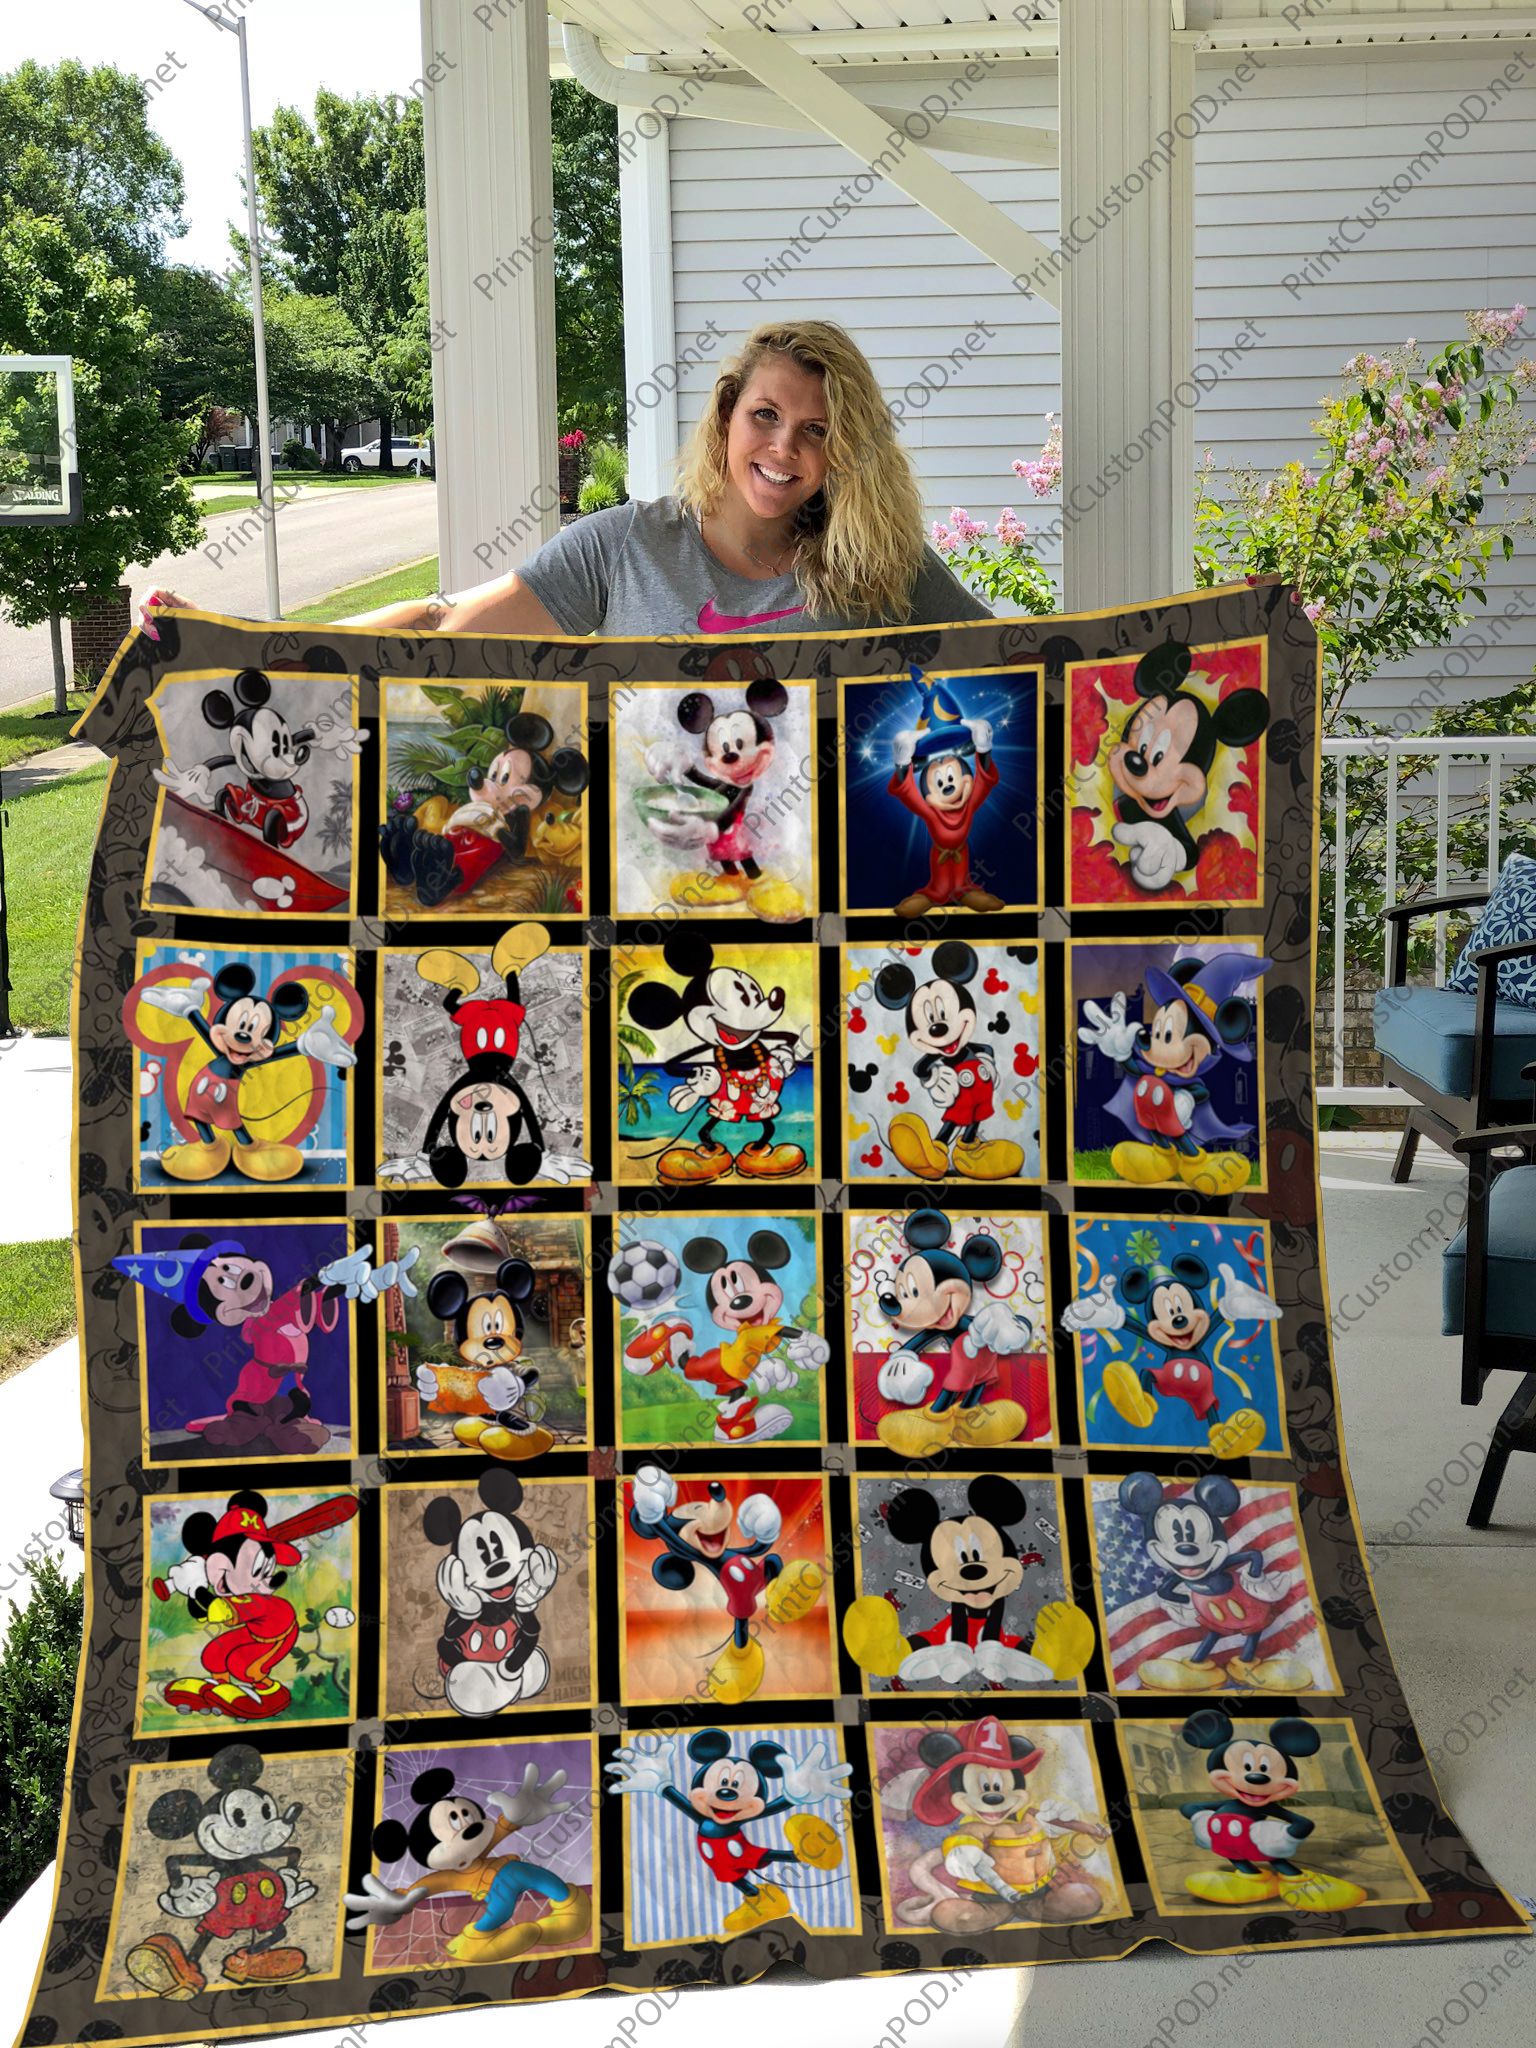 H – Mickey Mouse Quilt Blanket  Ver 25-2